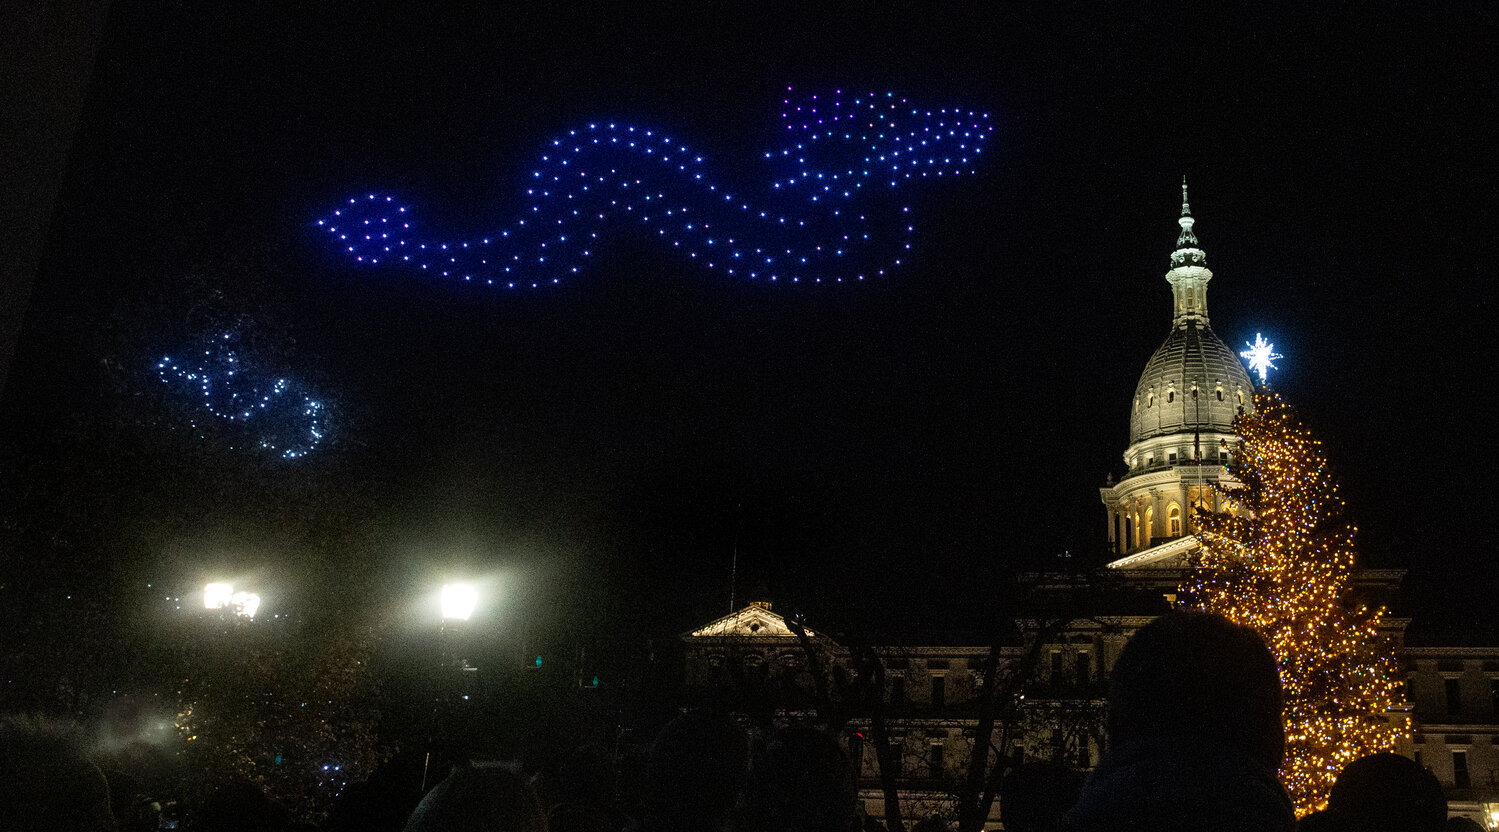 Firefly’s drone light show returned for its third year, illuminating the sky over the Capitol and dazzling audiences once again.